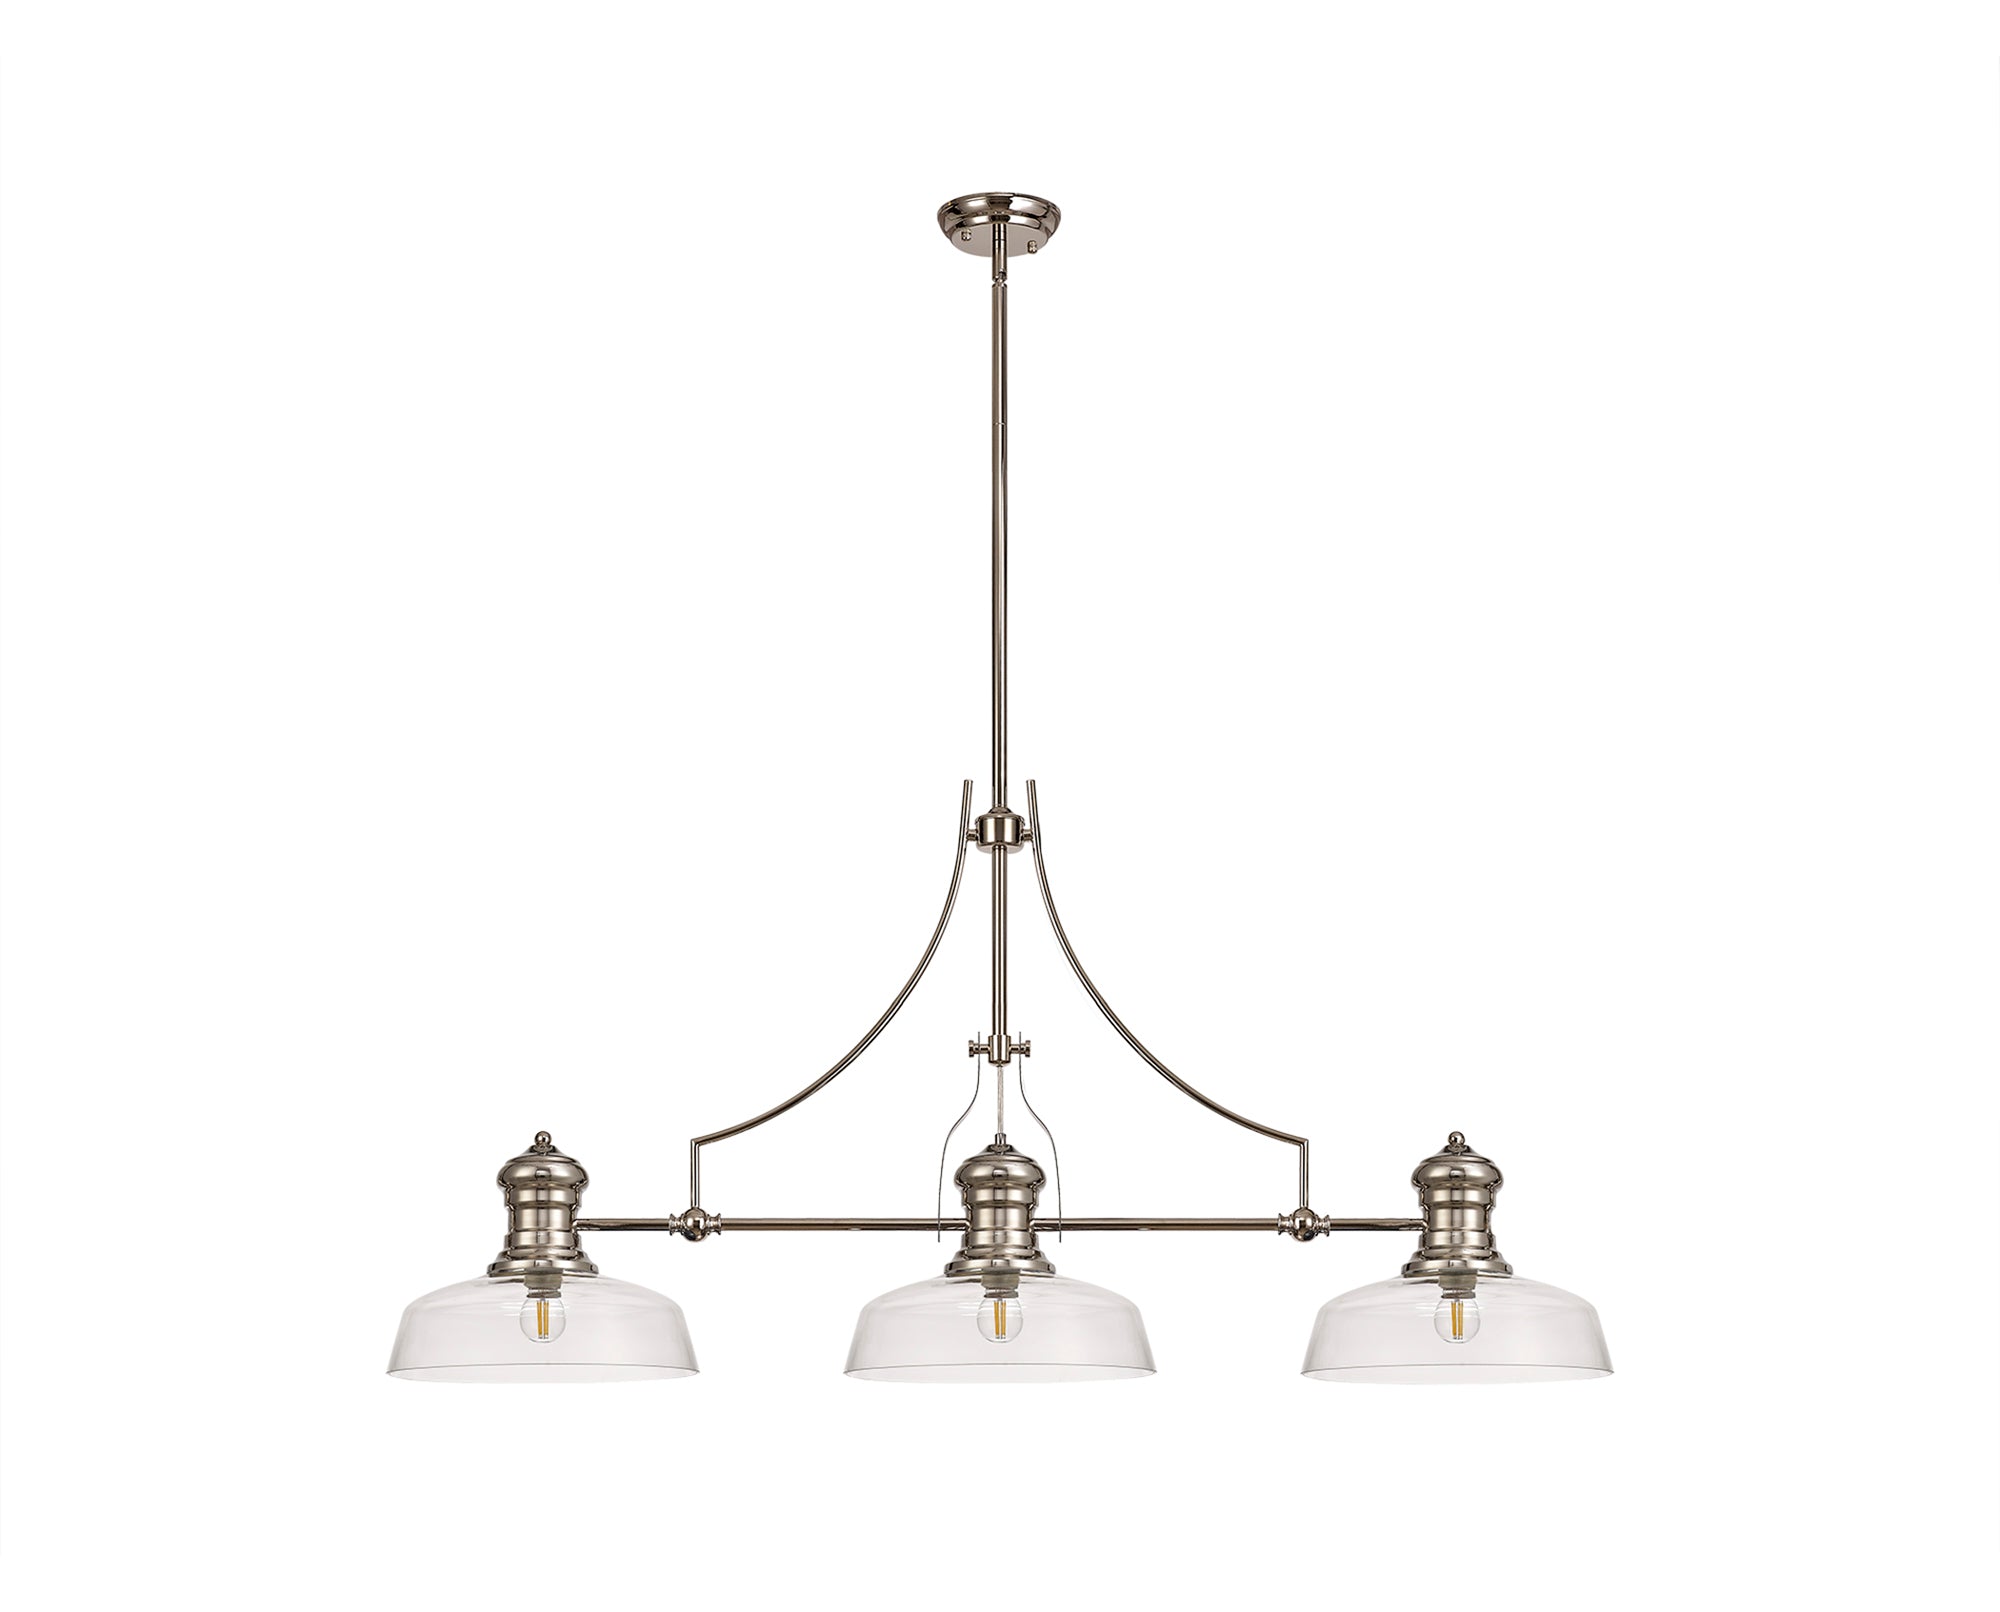 Docker 3 Light Linear Pendant E27 With 30cm Flat Round Glass Shade, Polished Nickel, Clear